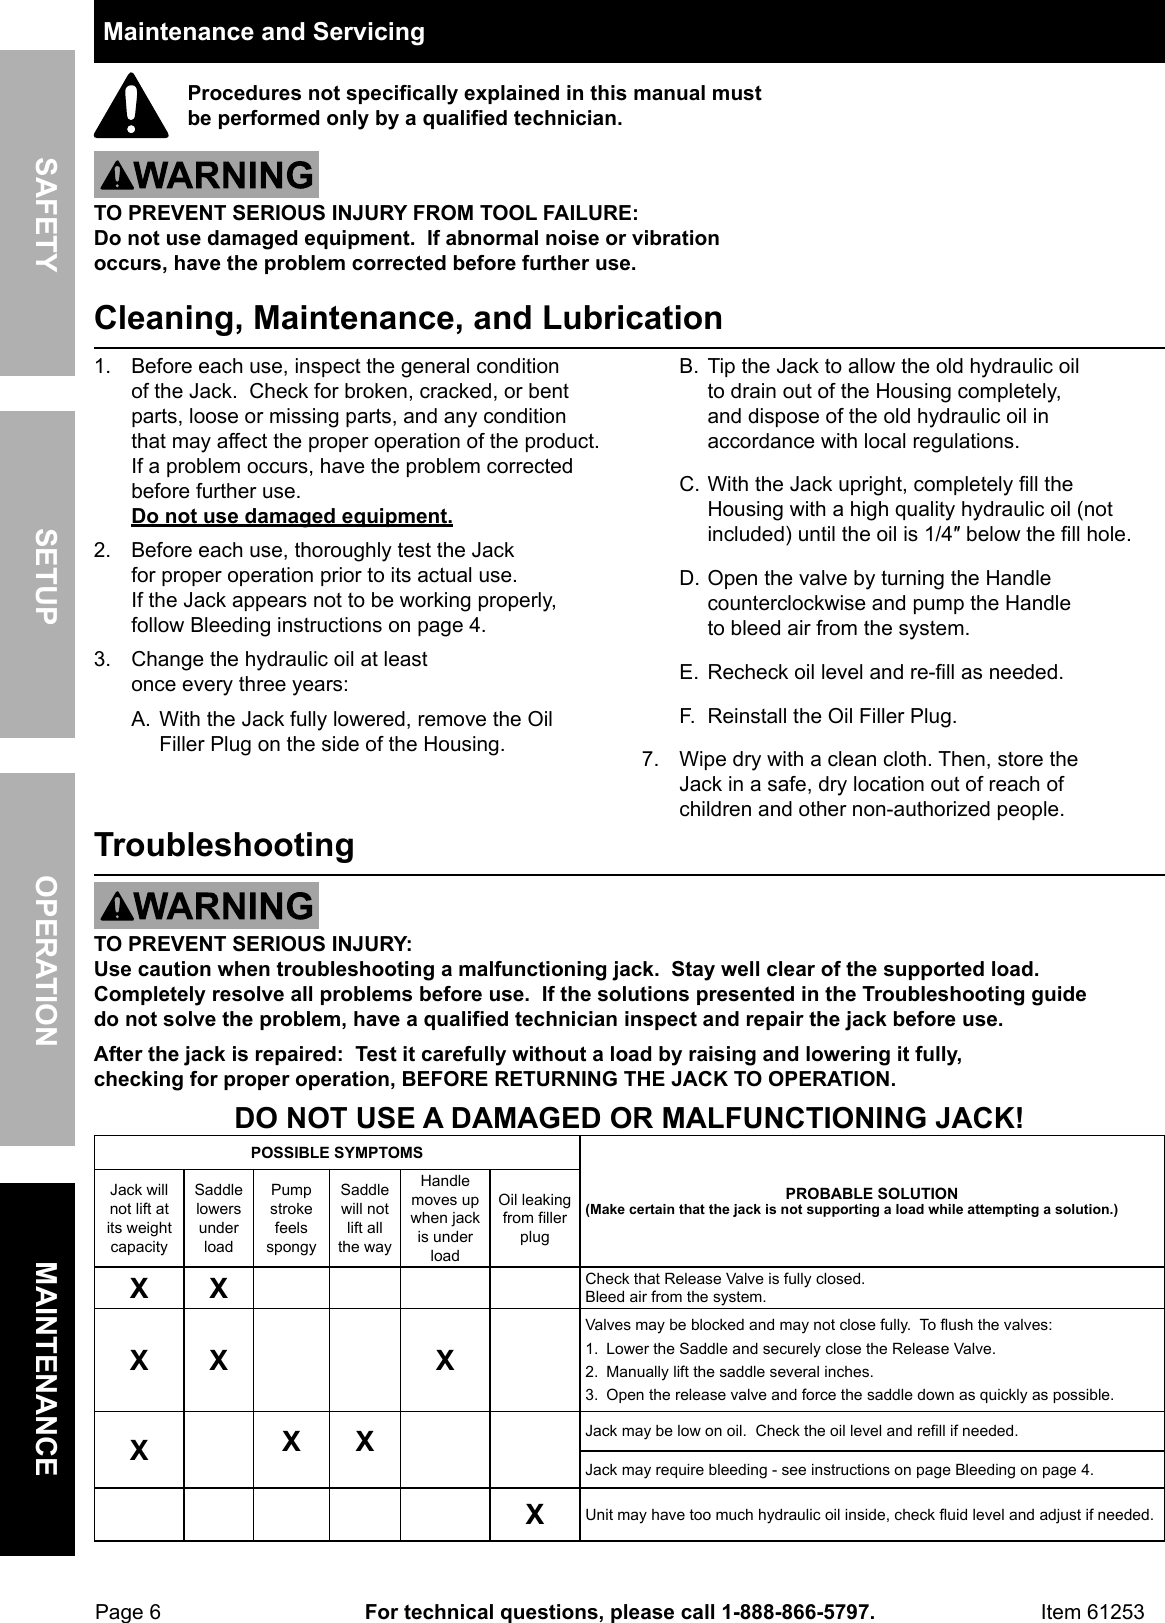 Page 6 of 8 - Manual For The 61253 3 Ton Low Profile Steel Heavy Duty Floor Jack With Rapid Pump®